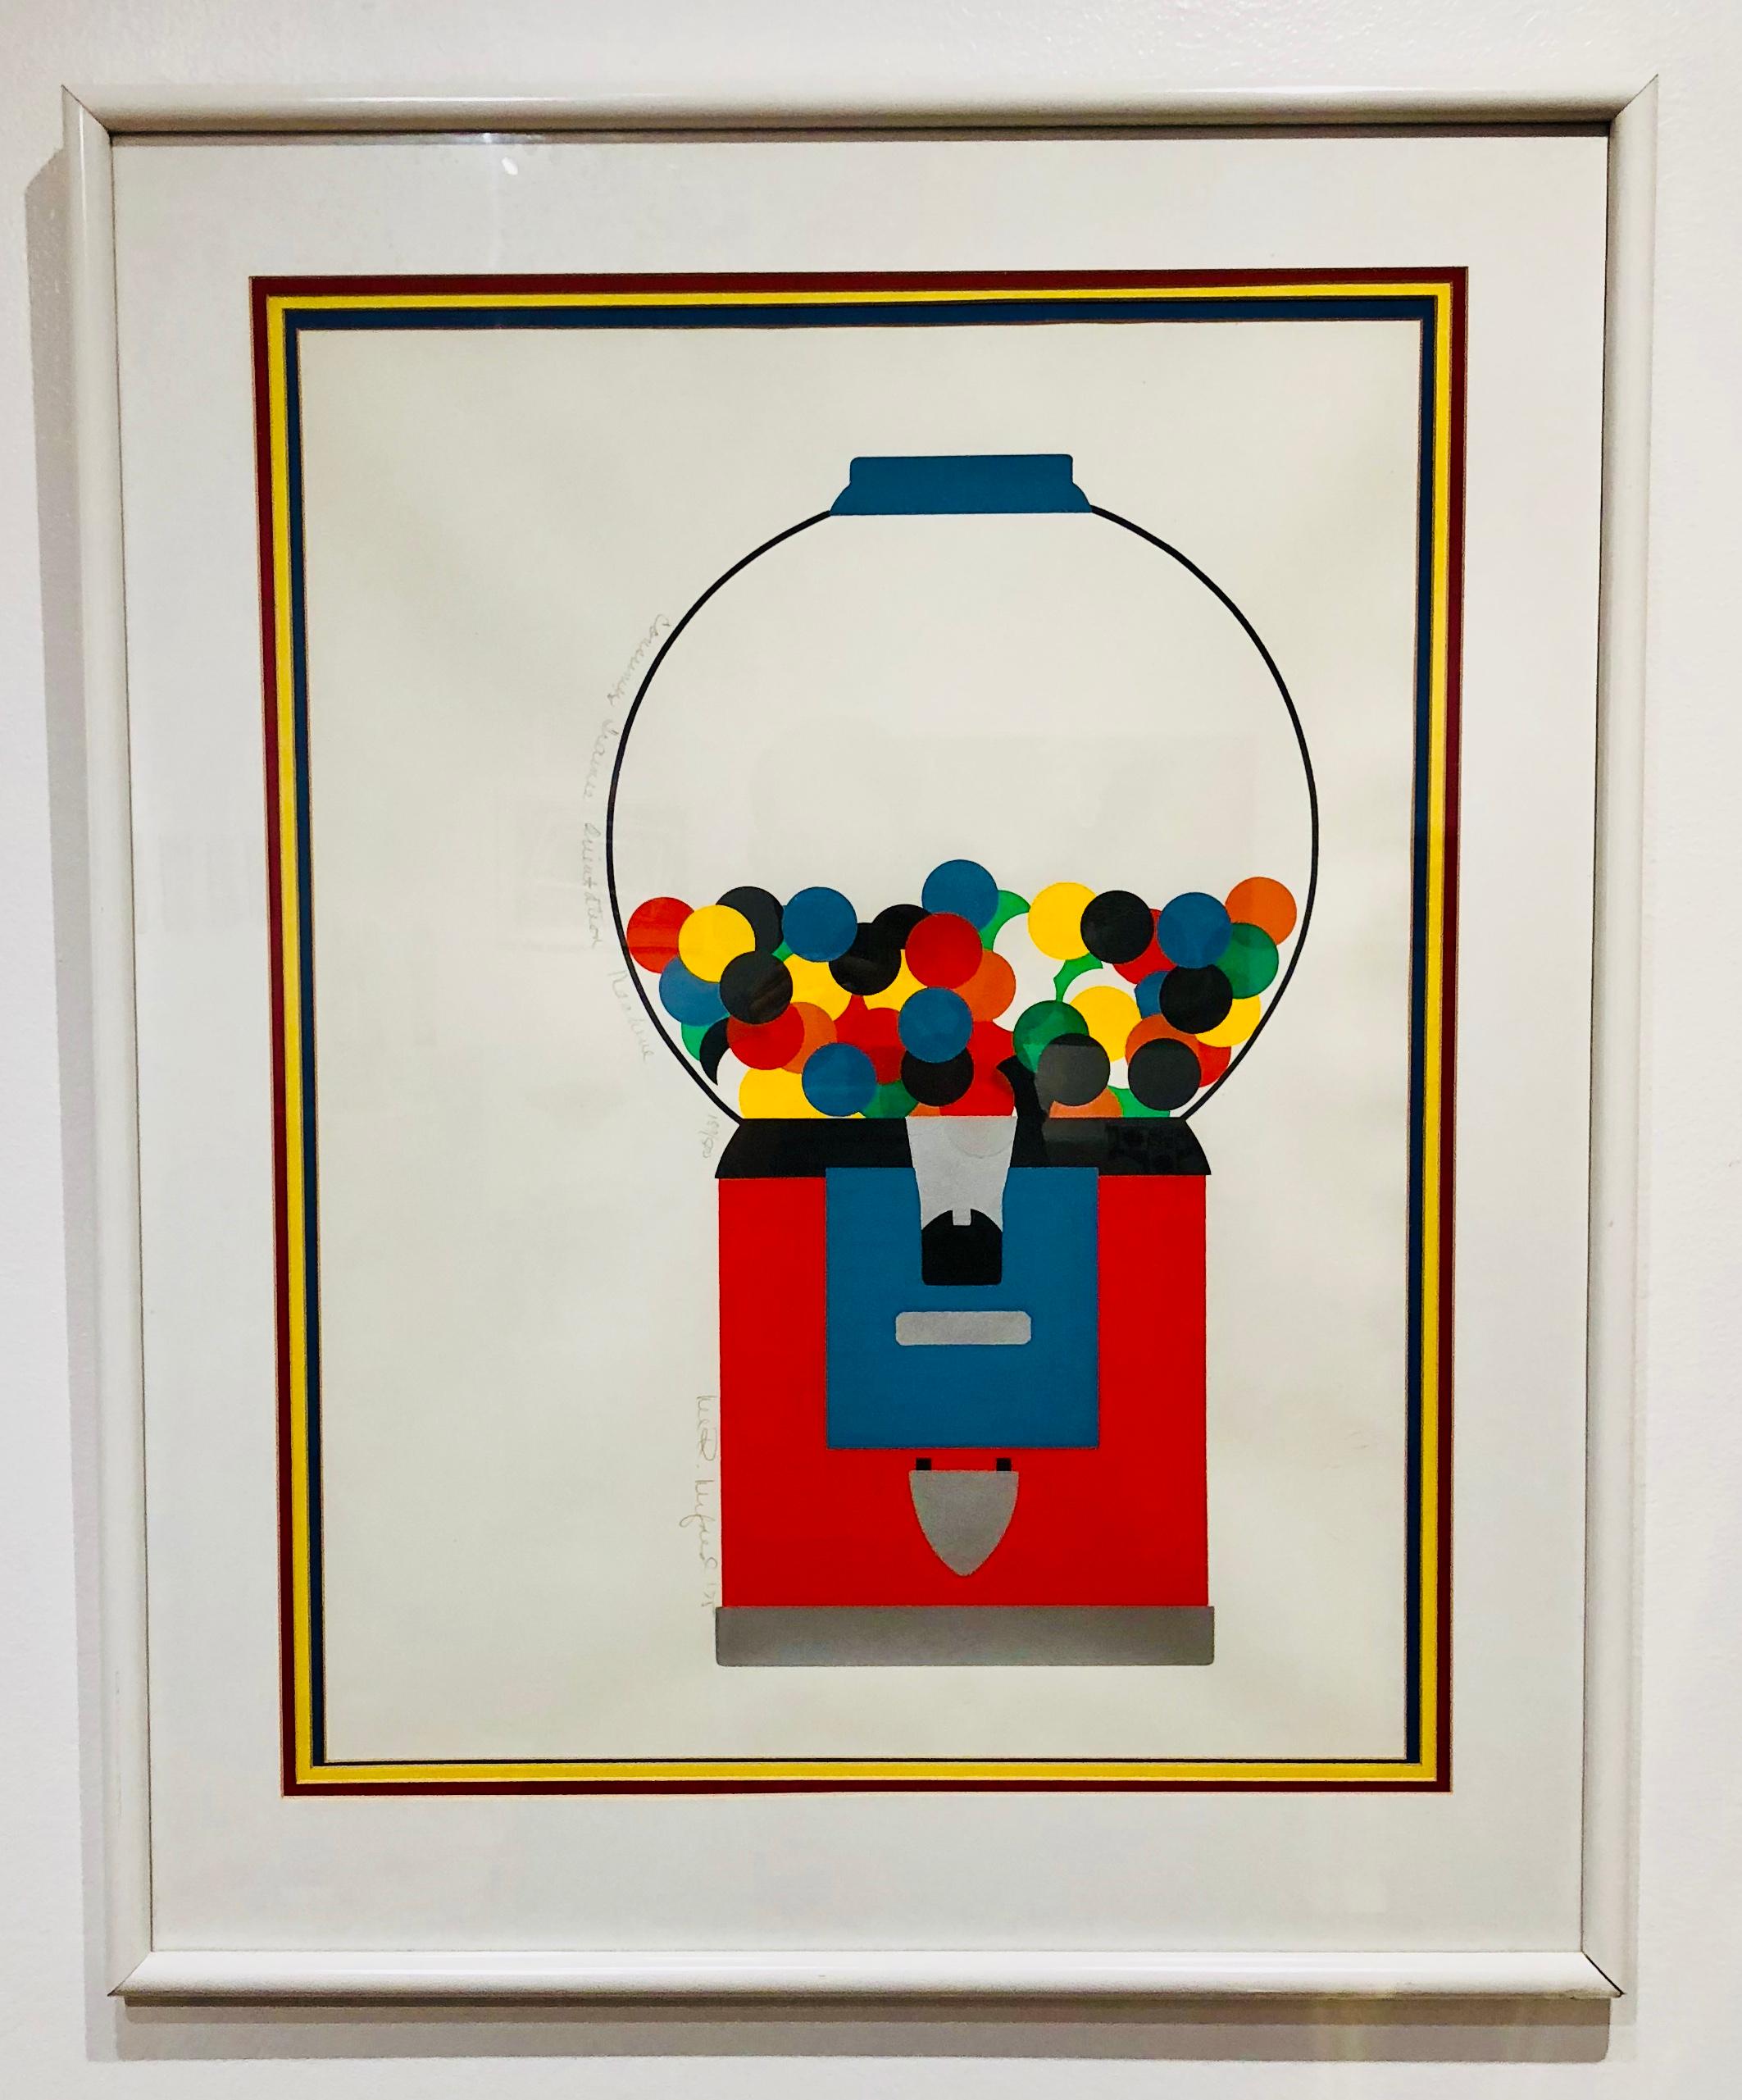 Cool and colorful gumball machine serigraph, signed and dated by Lee R Lerfald 189/500, from 1975, nicely framed and very clean condition.